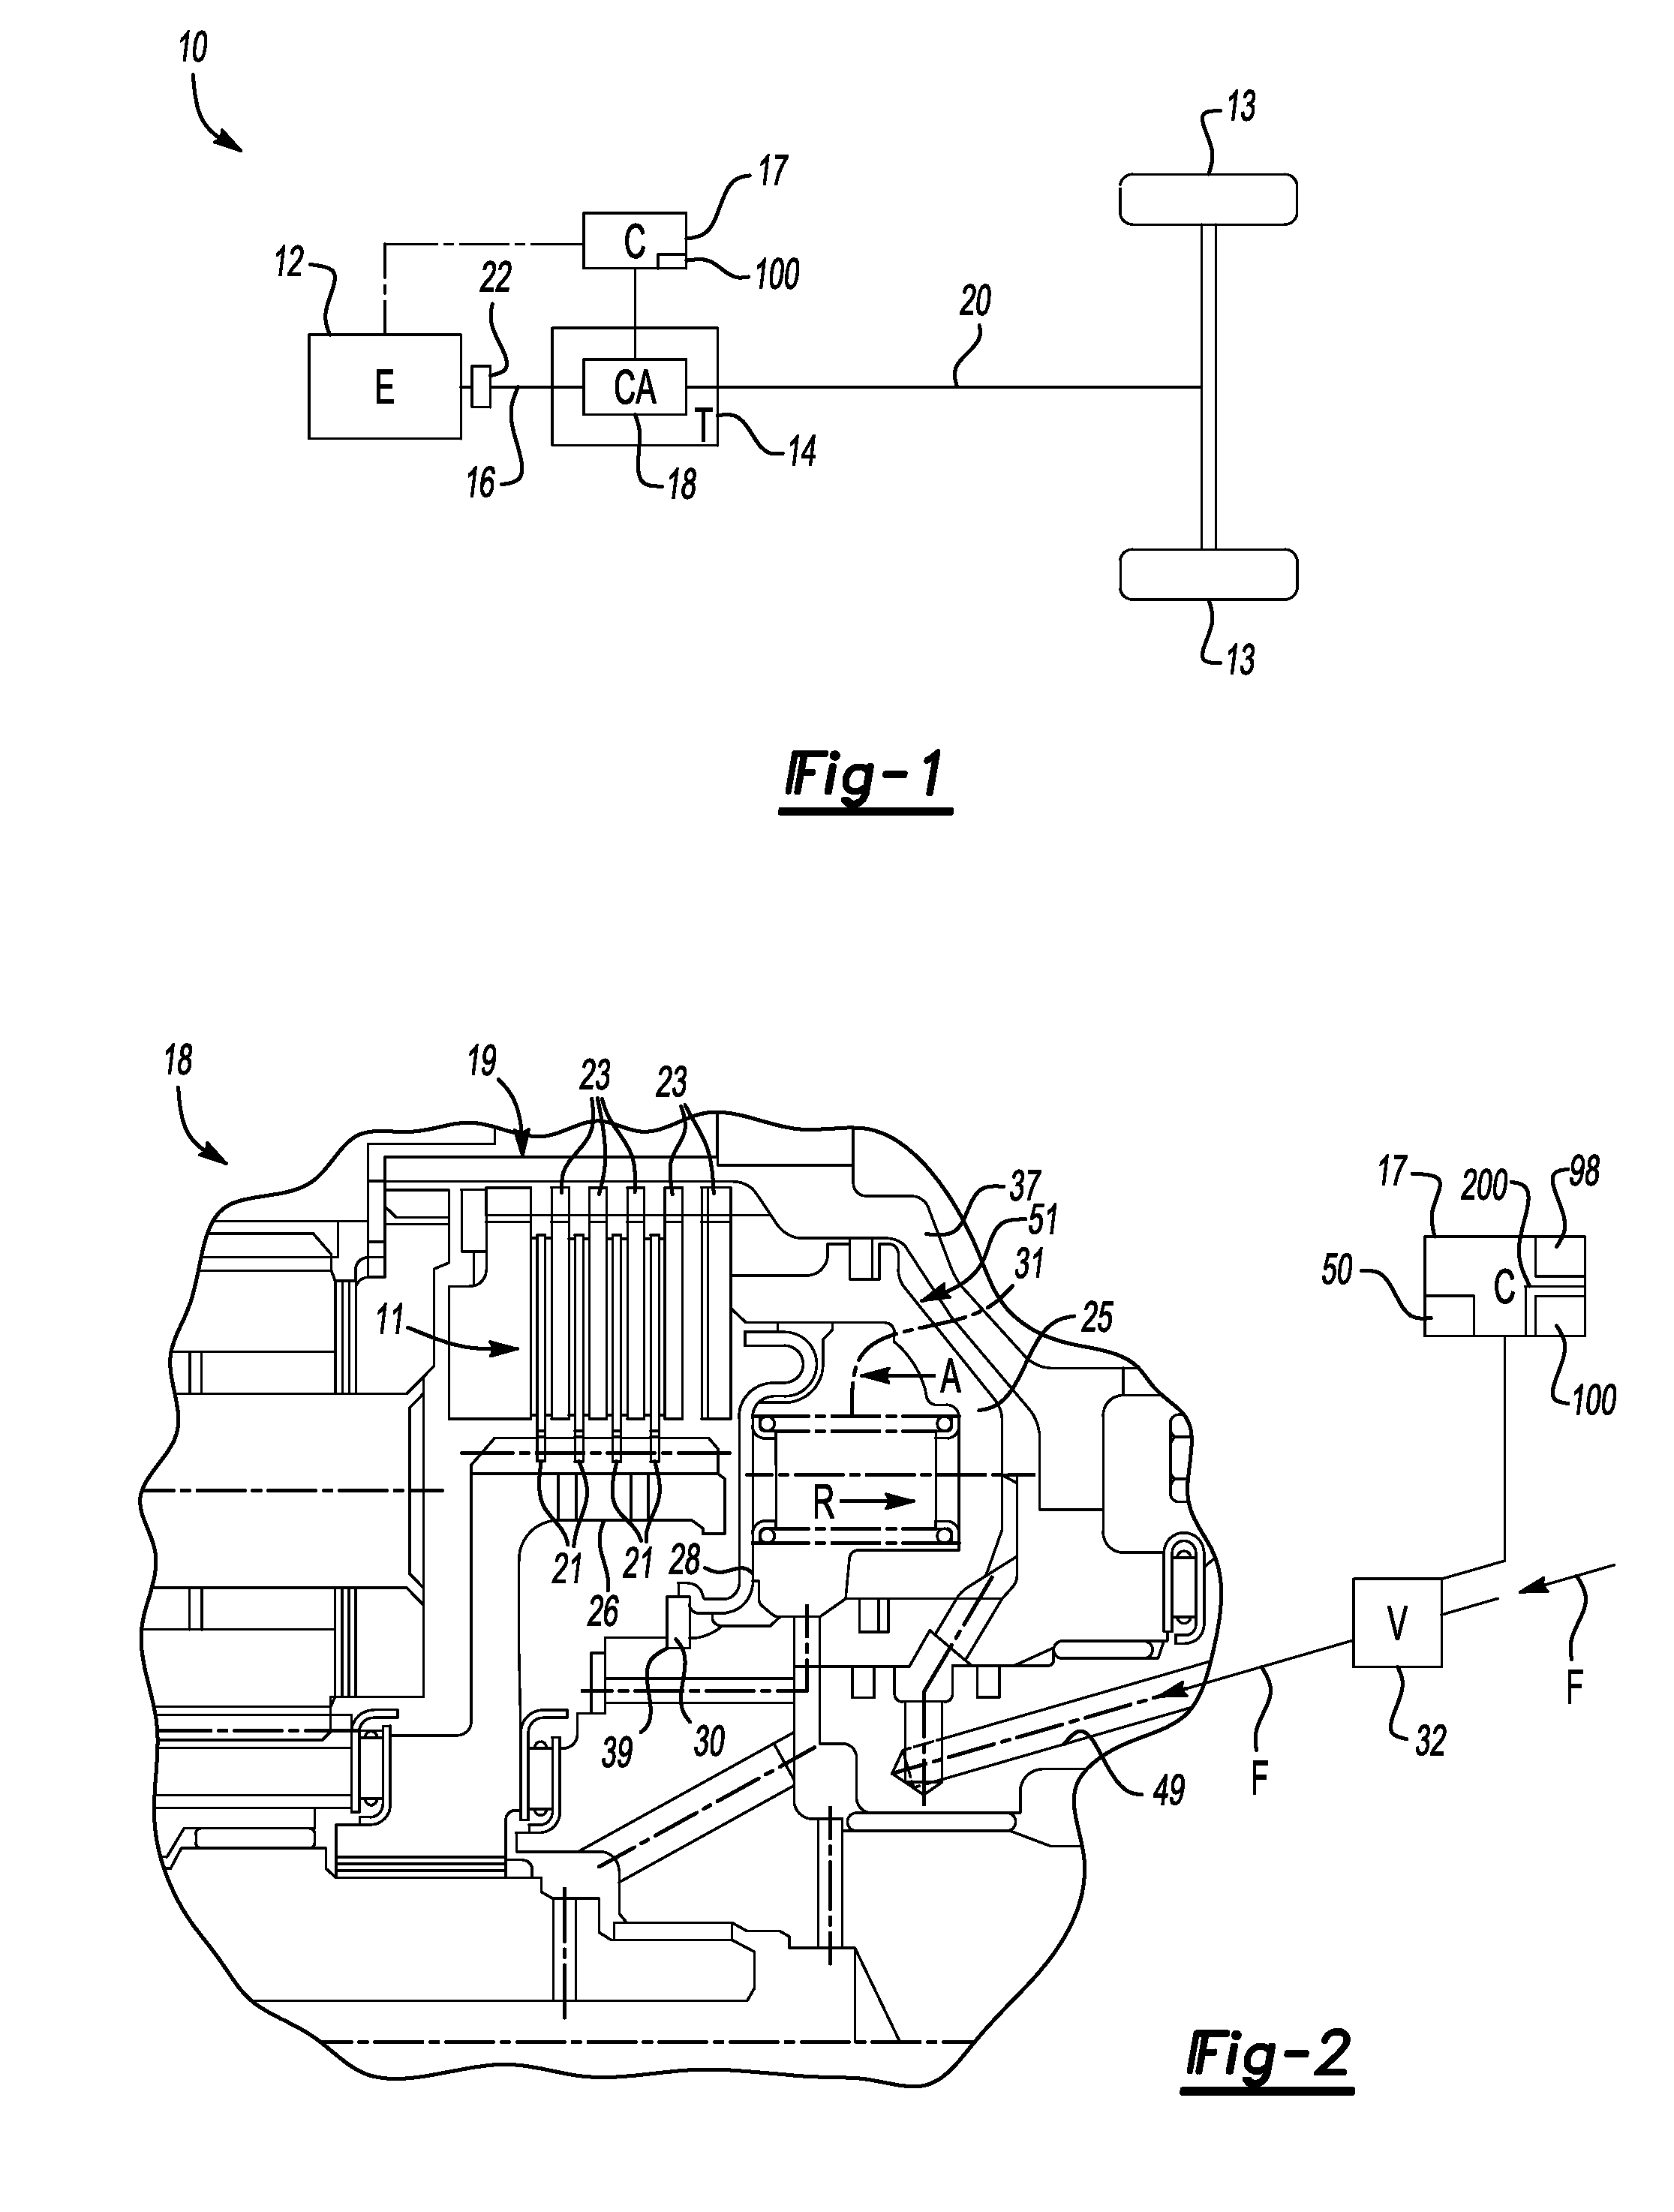 System and Method for Controlling a Clutch Fill Event